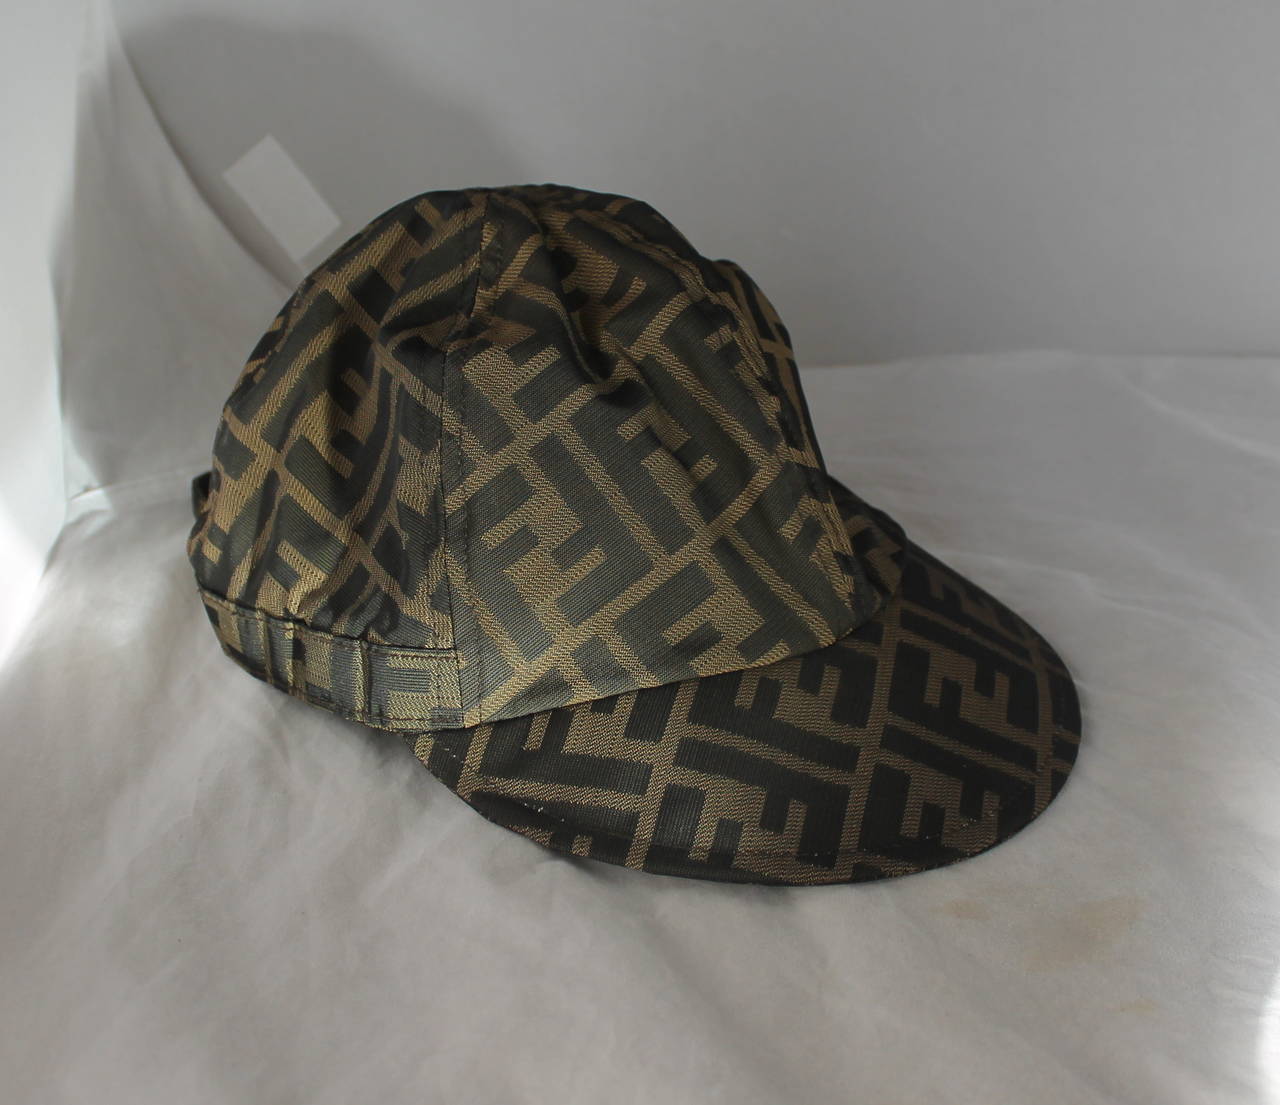 Fendi Monogram Printed Baseball-Style Cap. This cap is in very good condition with light use. It is adjustable up to 23